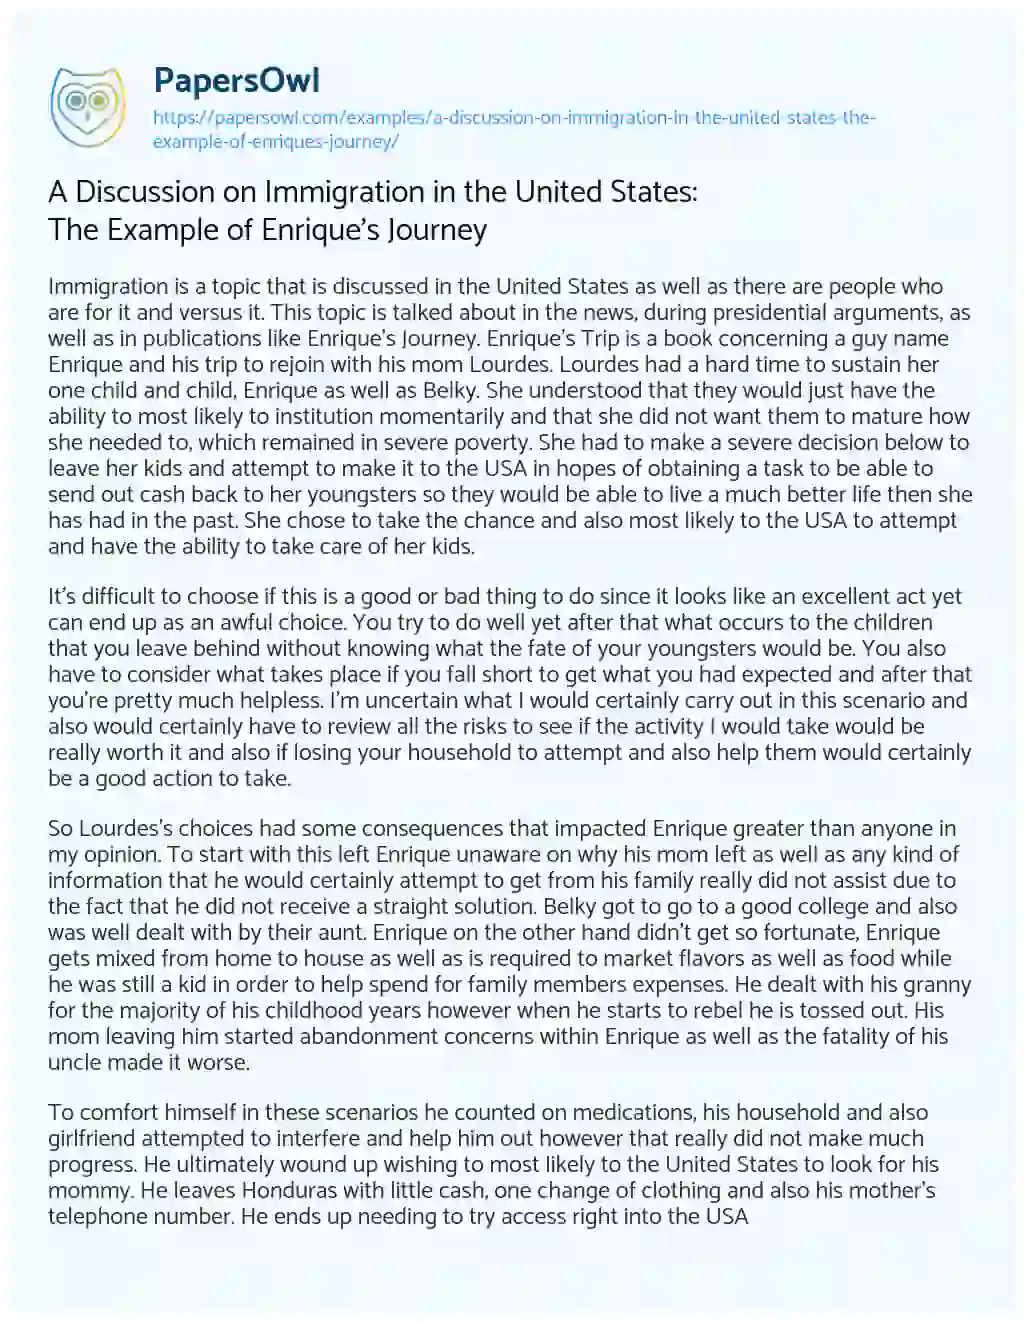 Essay on A Discussion on Immigration in the United States: the Example of Enrique’s Journey